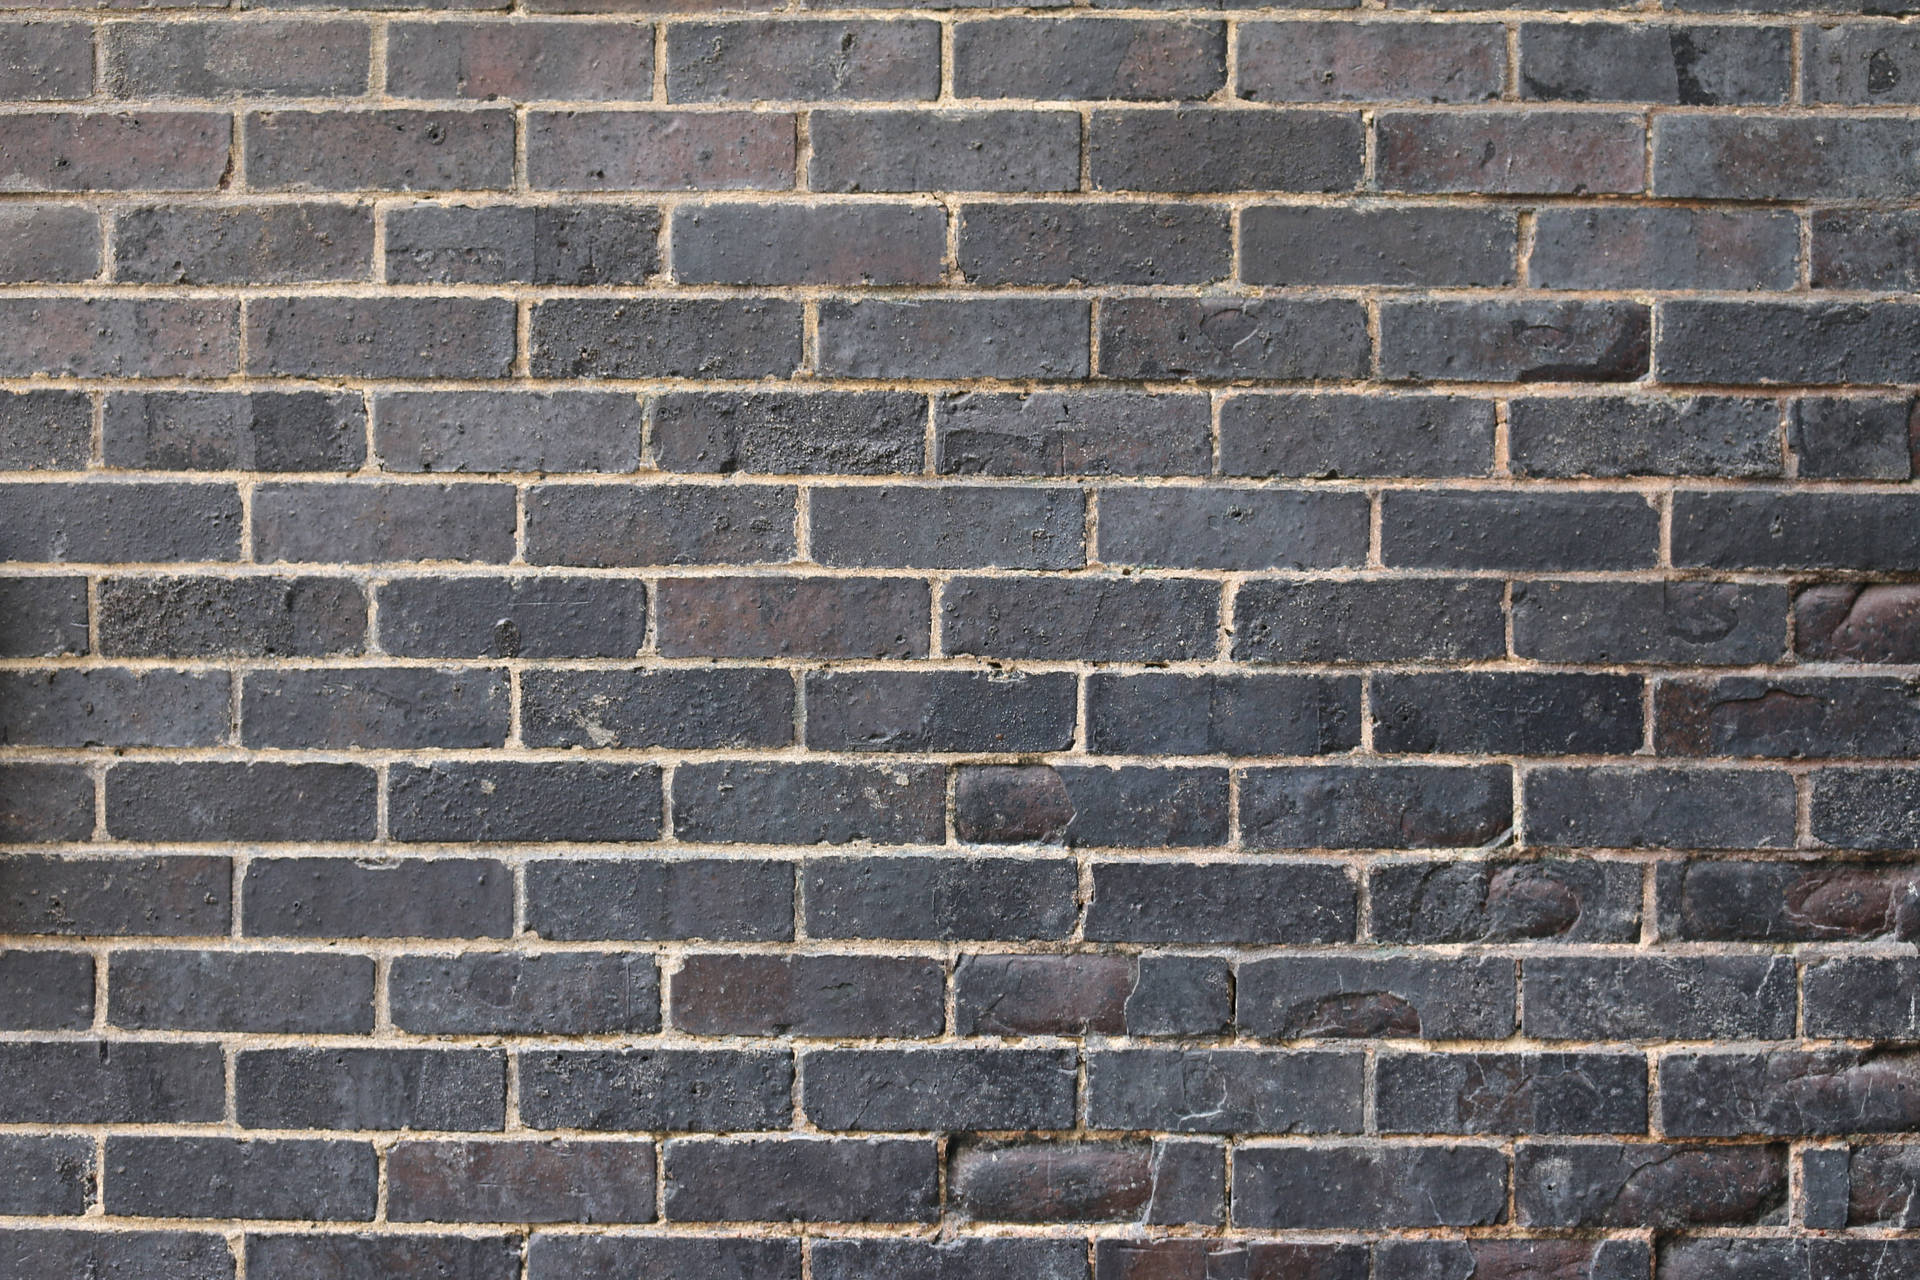 Brick 5472X3648 Wallpaper and Background Image